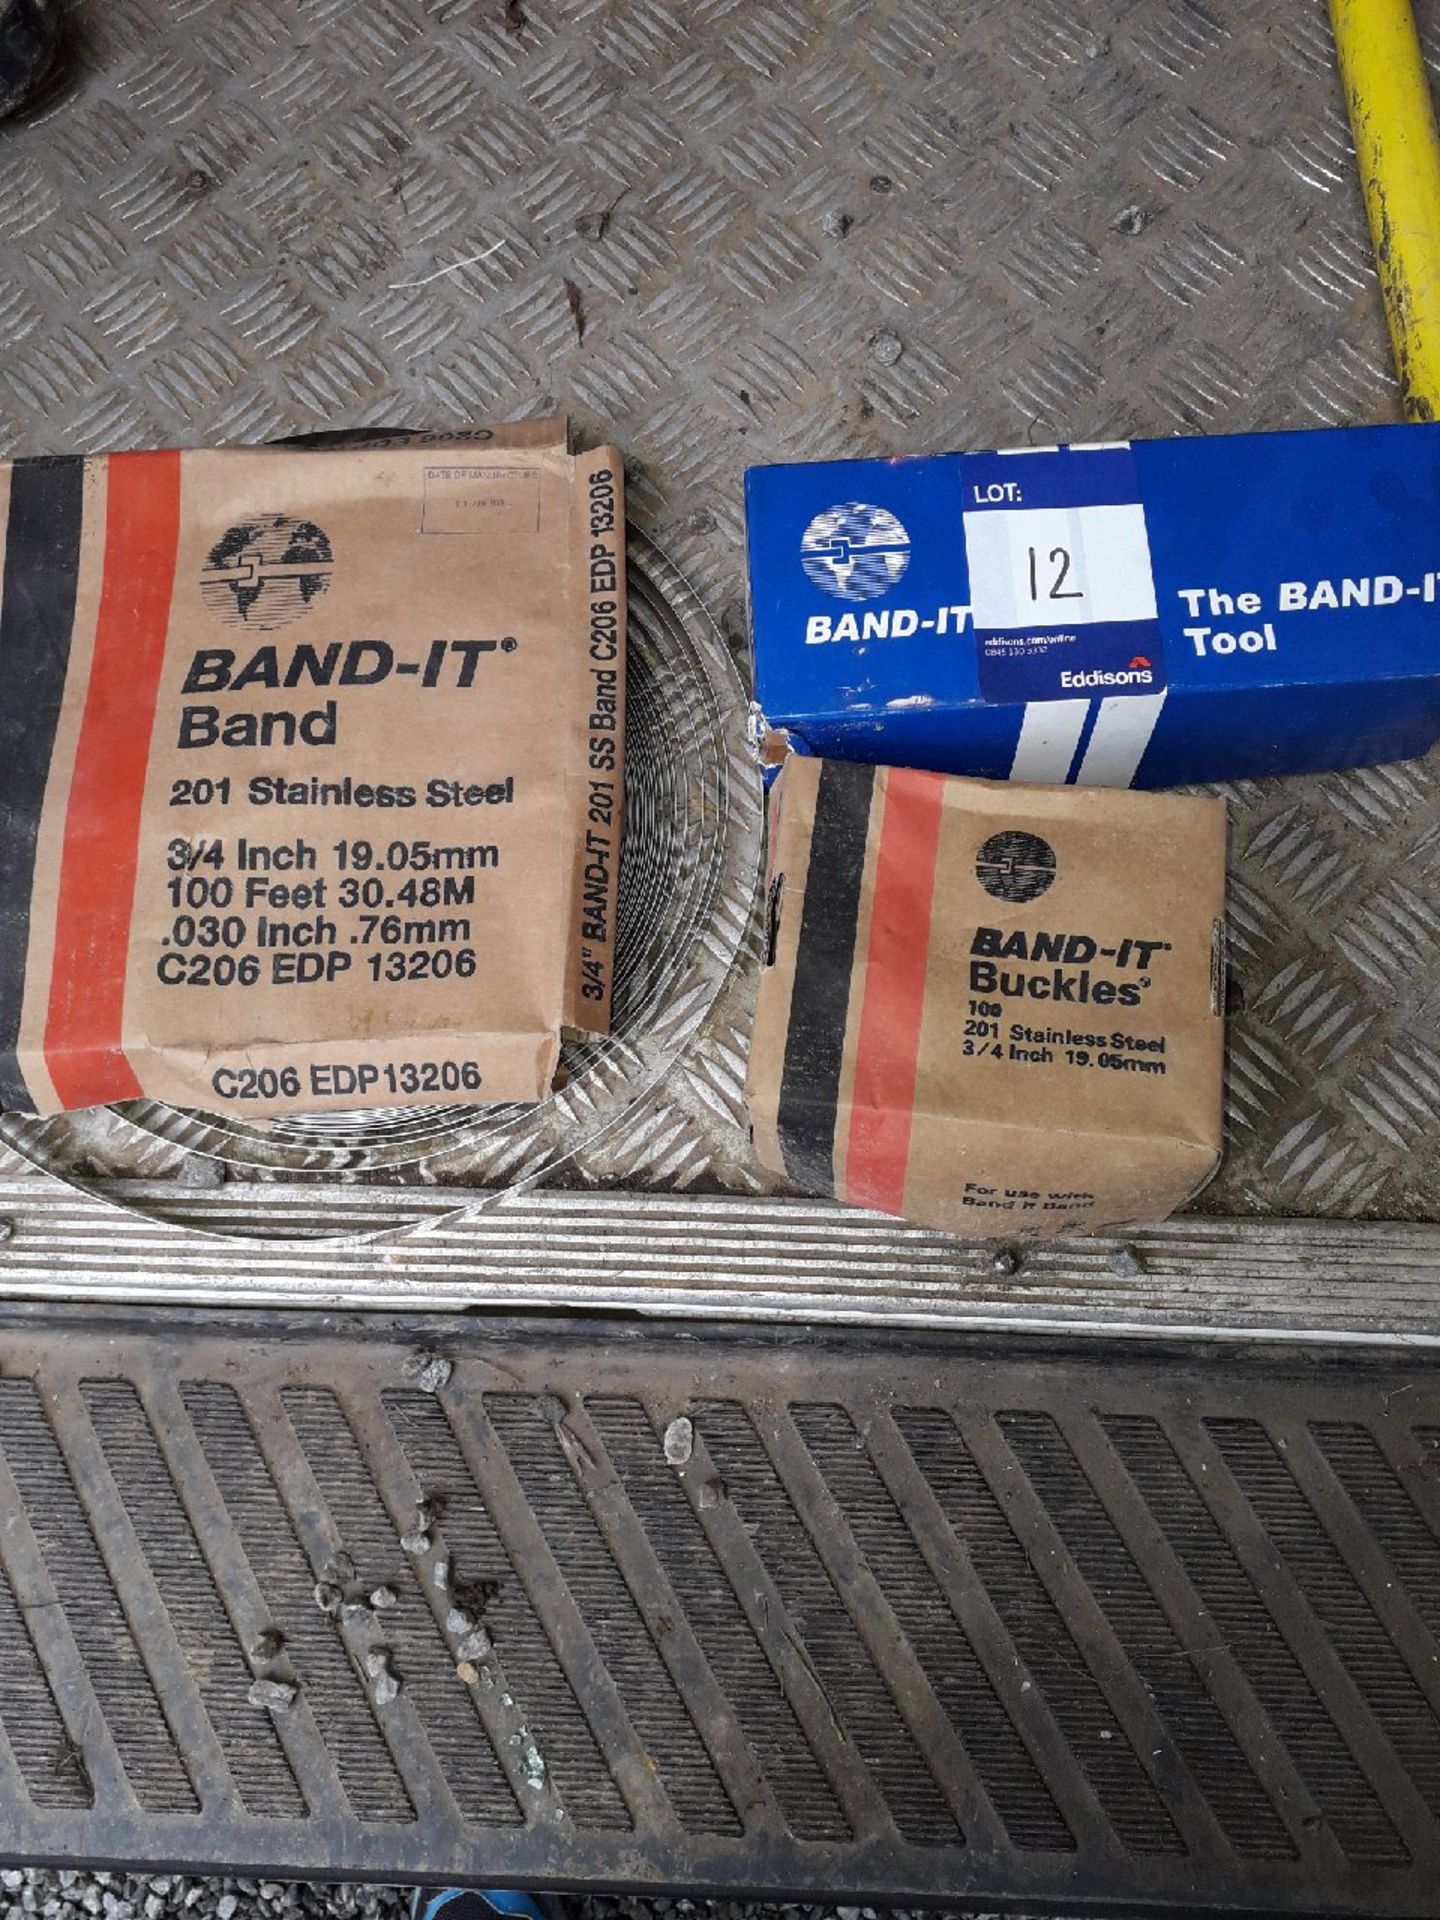 3 x Band-It items consisting of The Band-It tool, Band-It buckles, Band-It Band